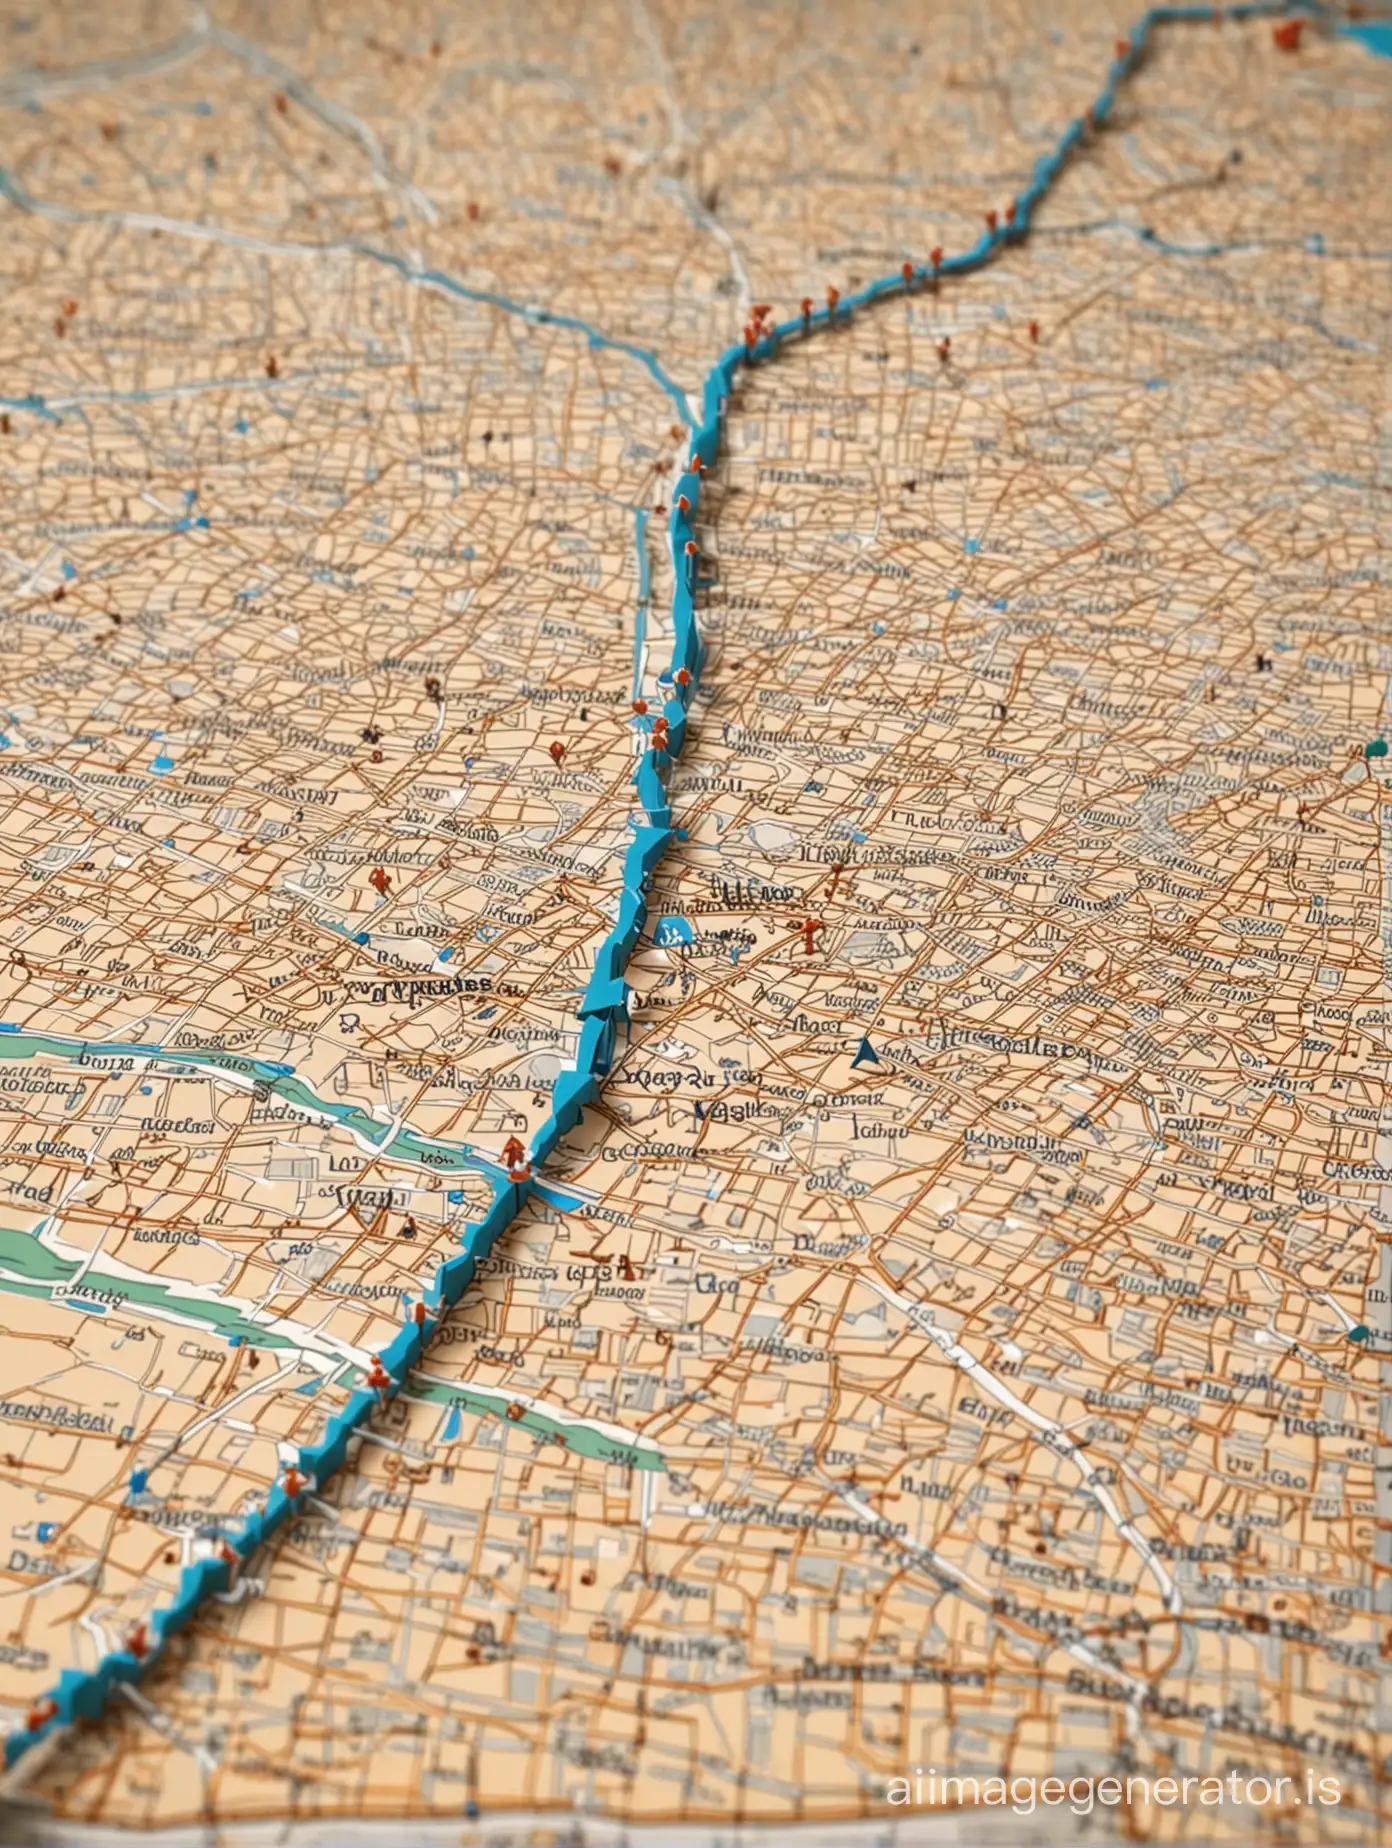 3D map with arrows showing distance between New York and Las Angeles